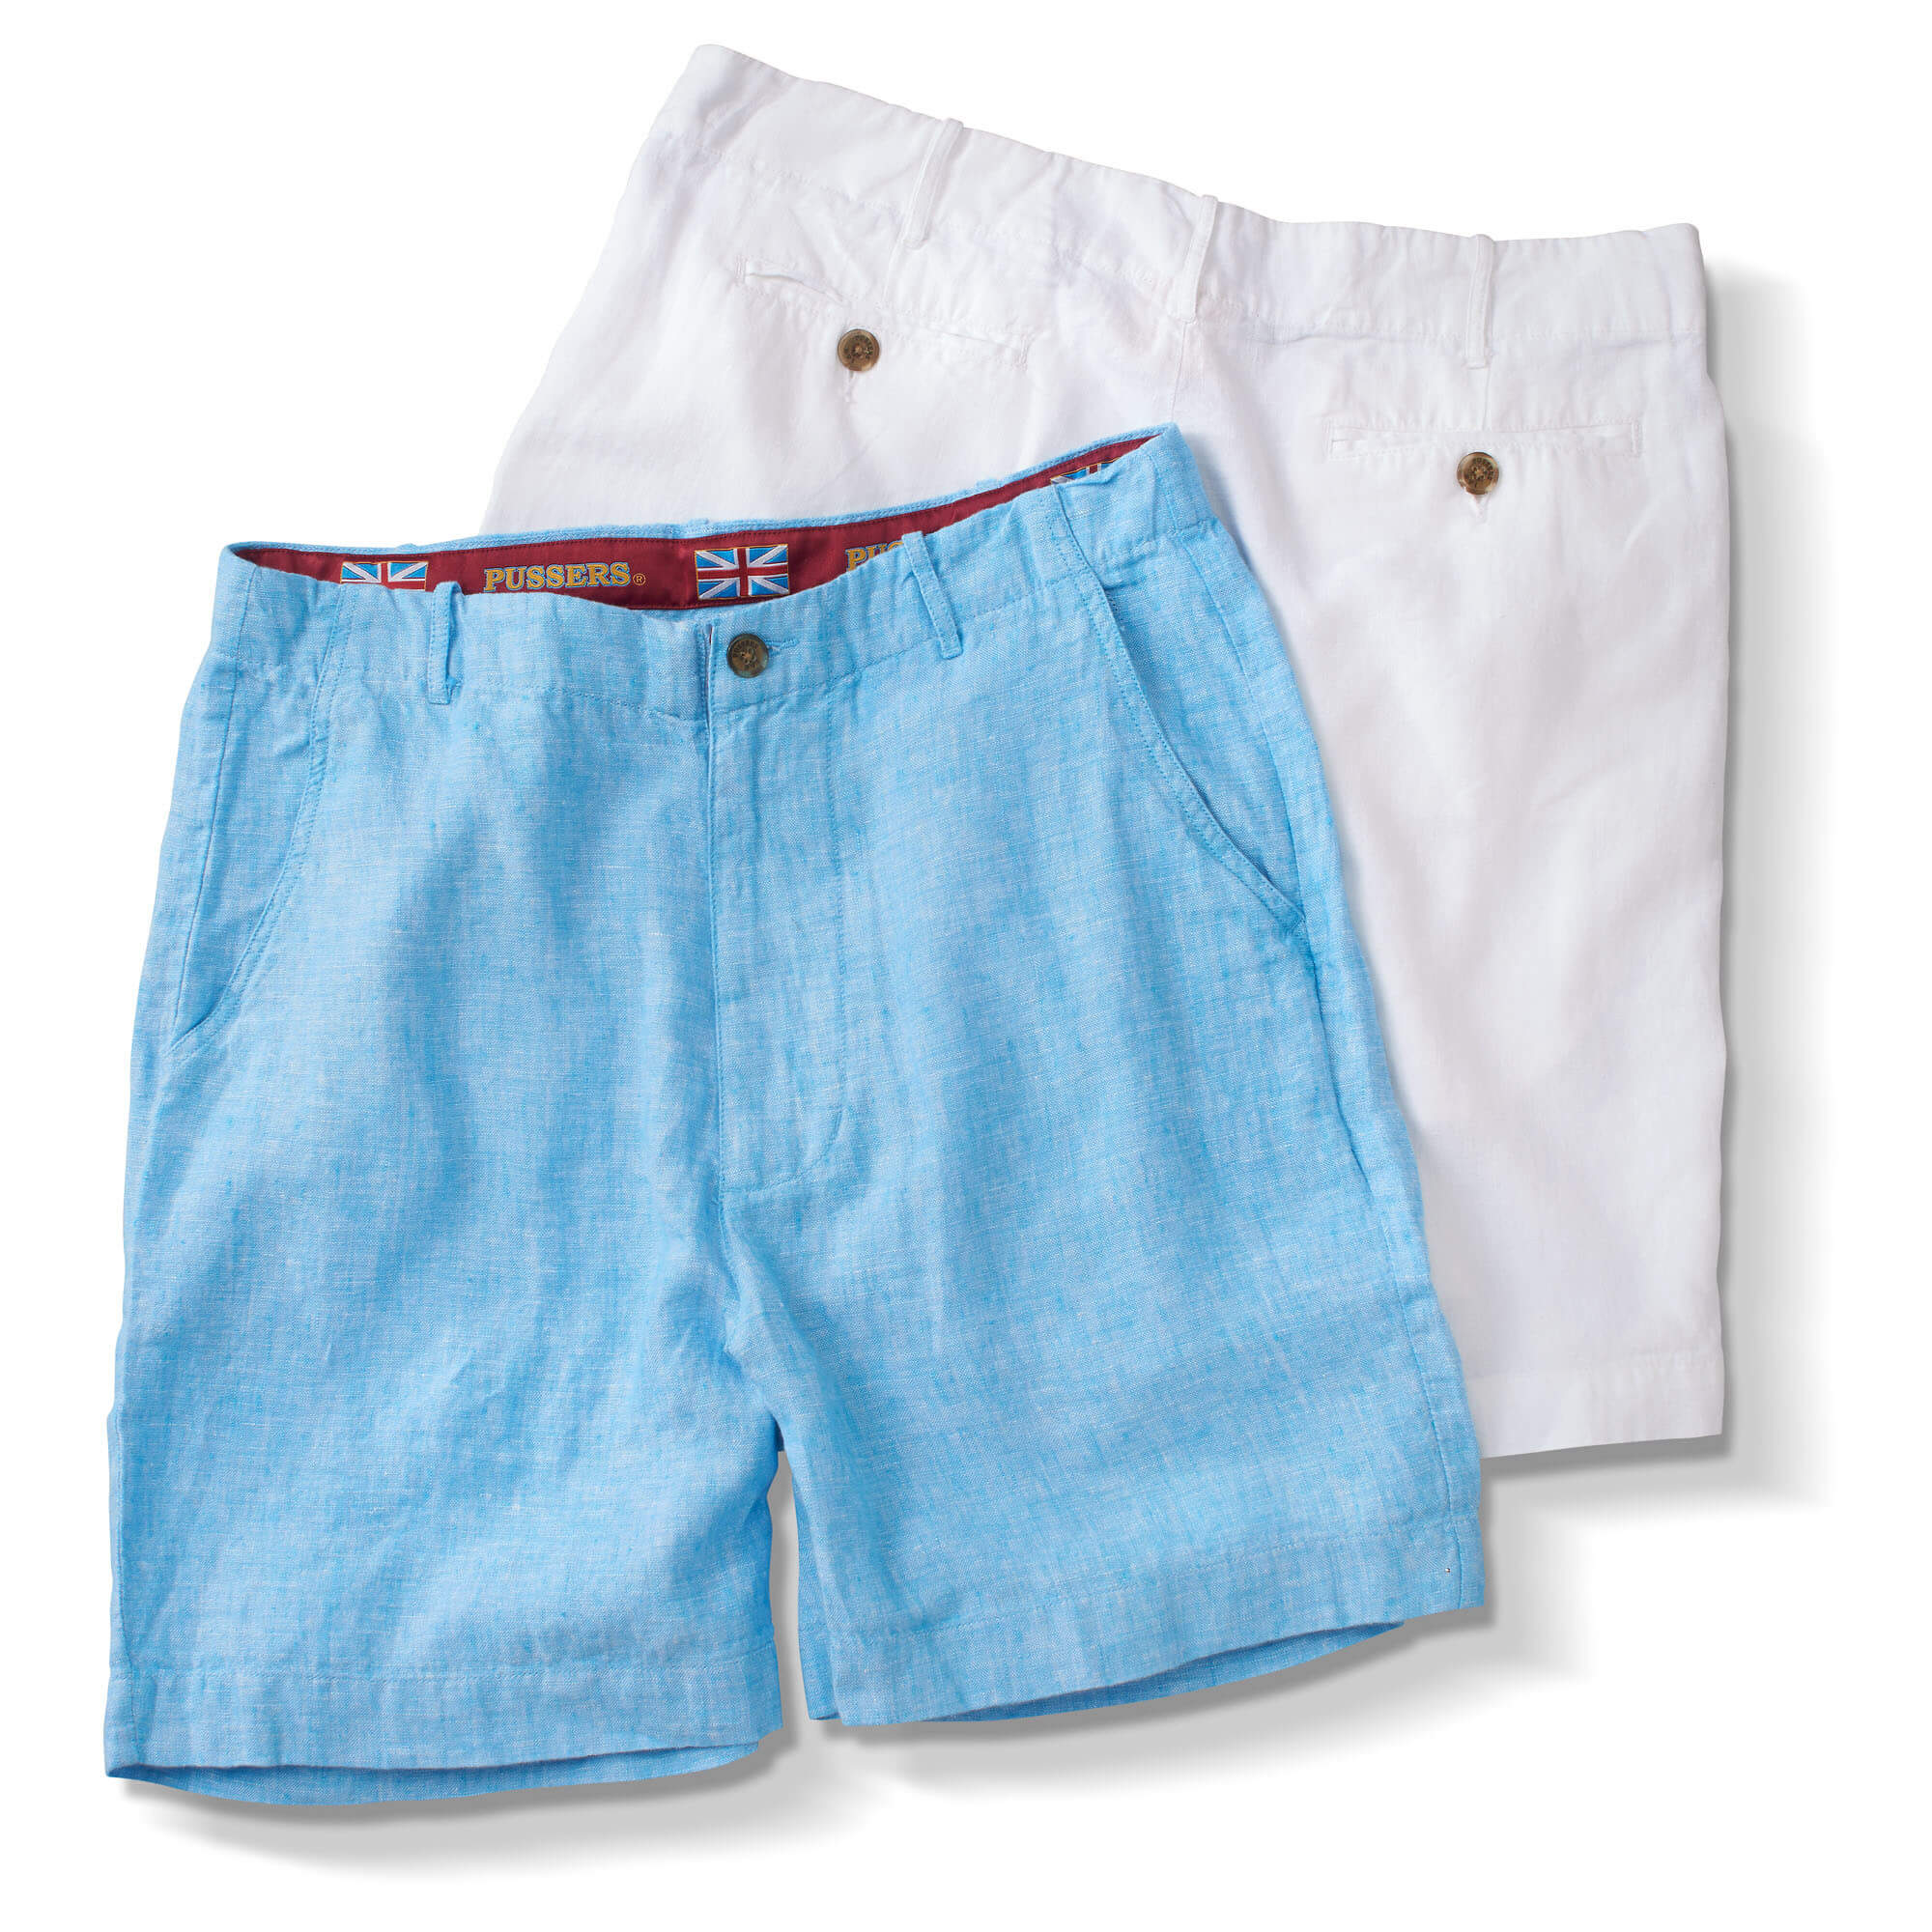 Men's linen shorts are a versatile and stylish addition to any warm-weather wardrobe. Known for their lightweight and breathable nature